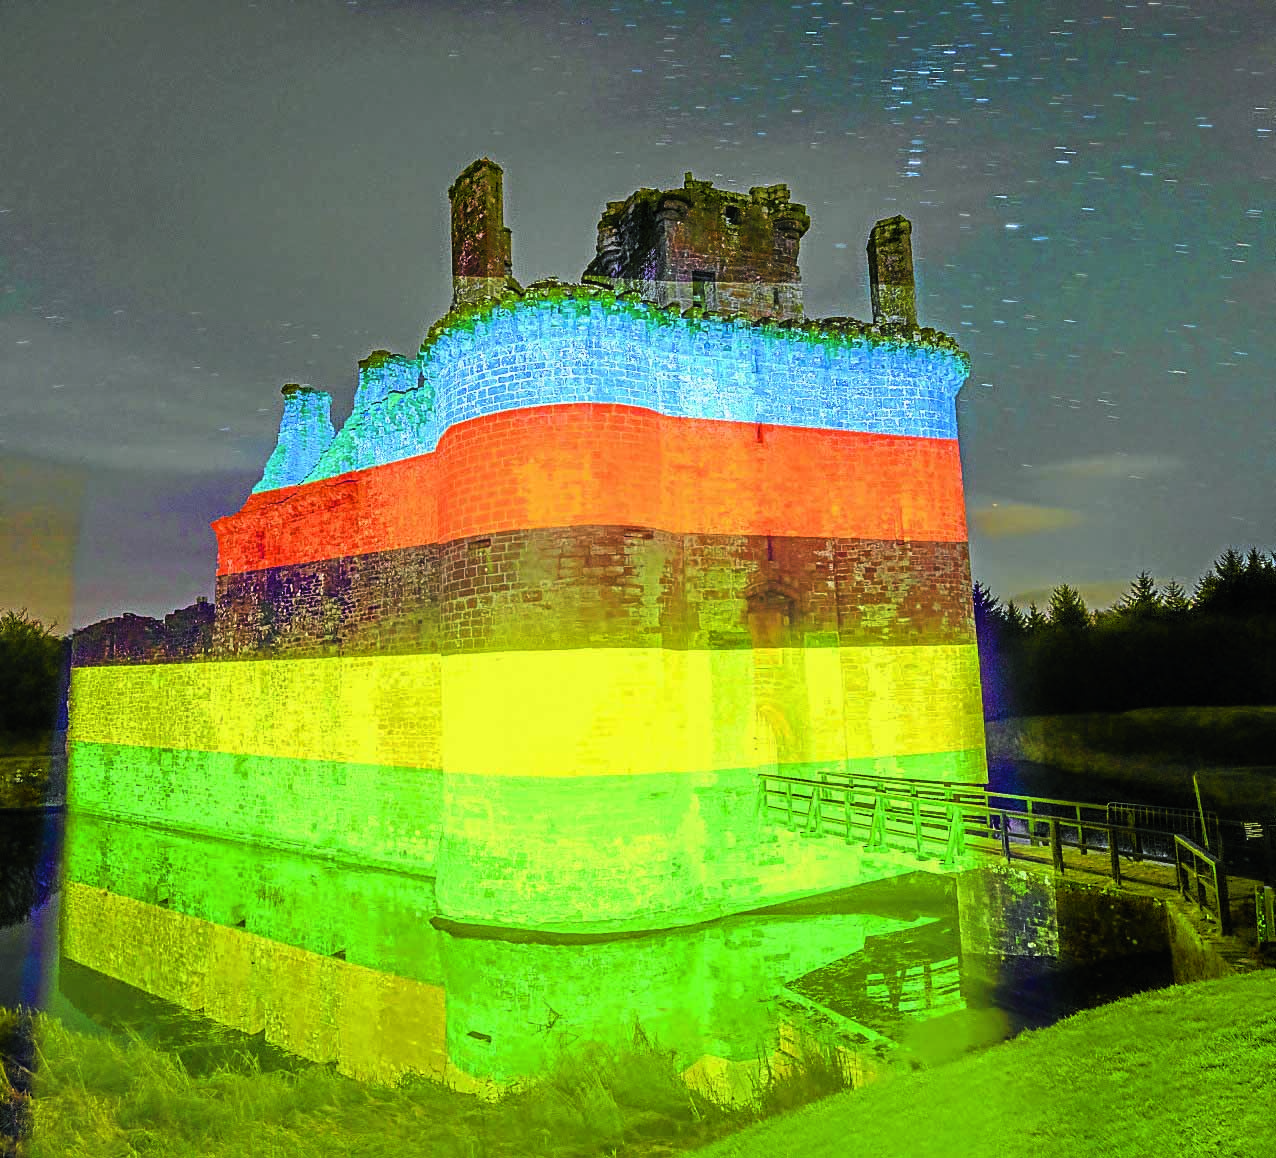 Castle lights up to mark cycling countdown